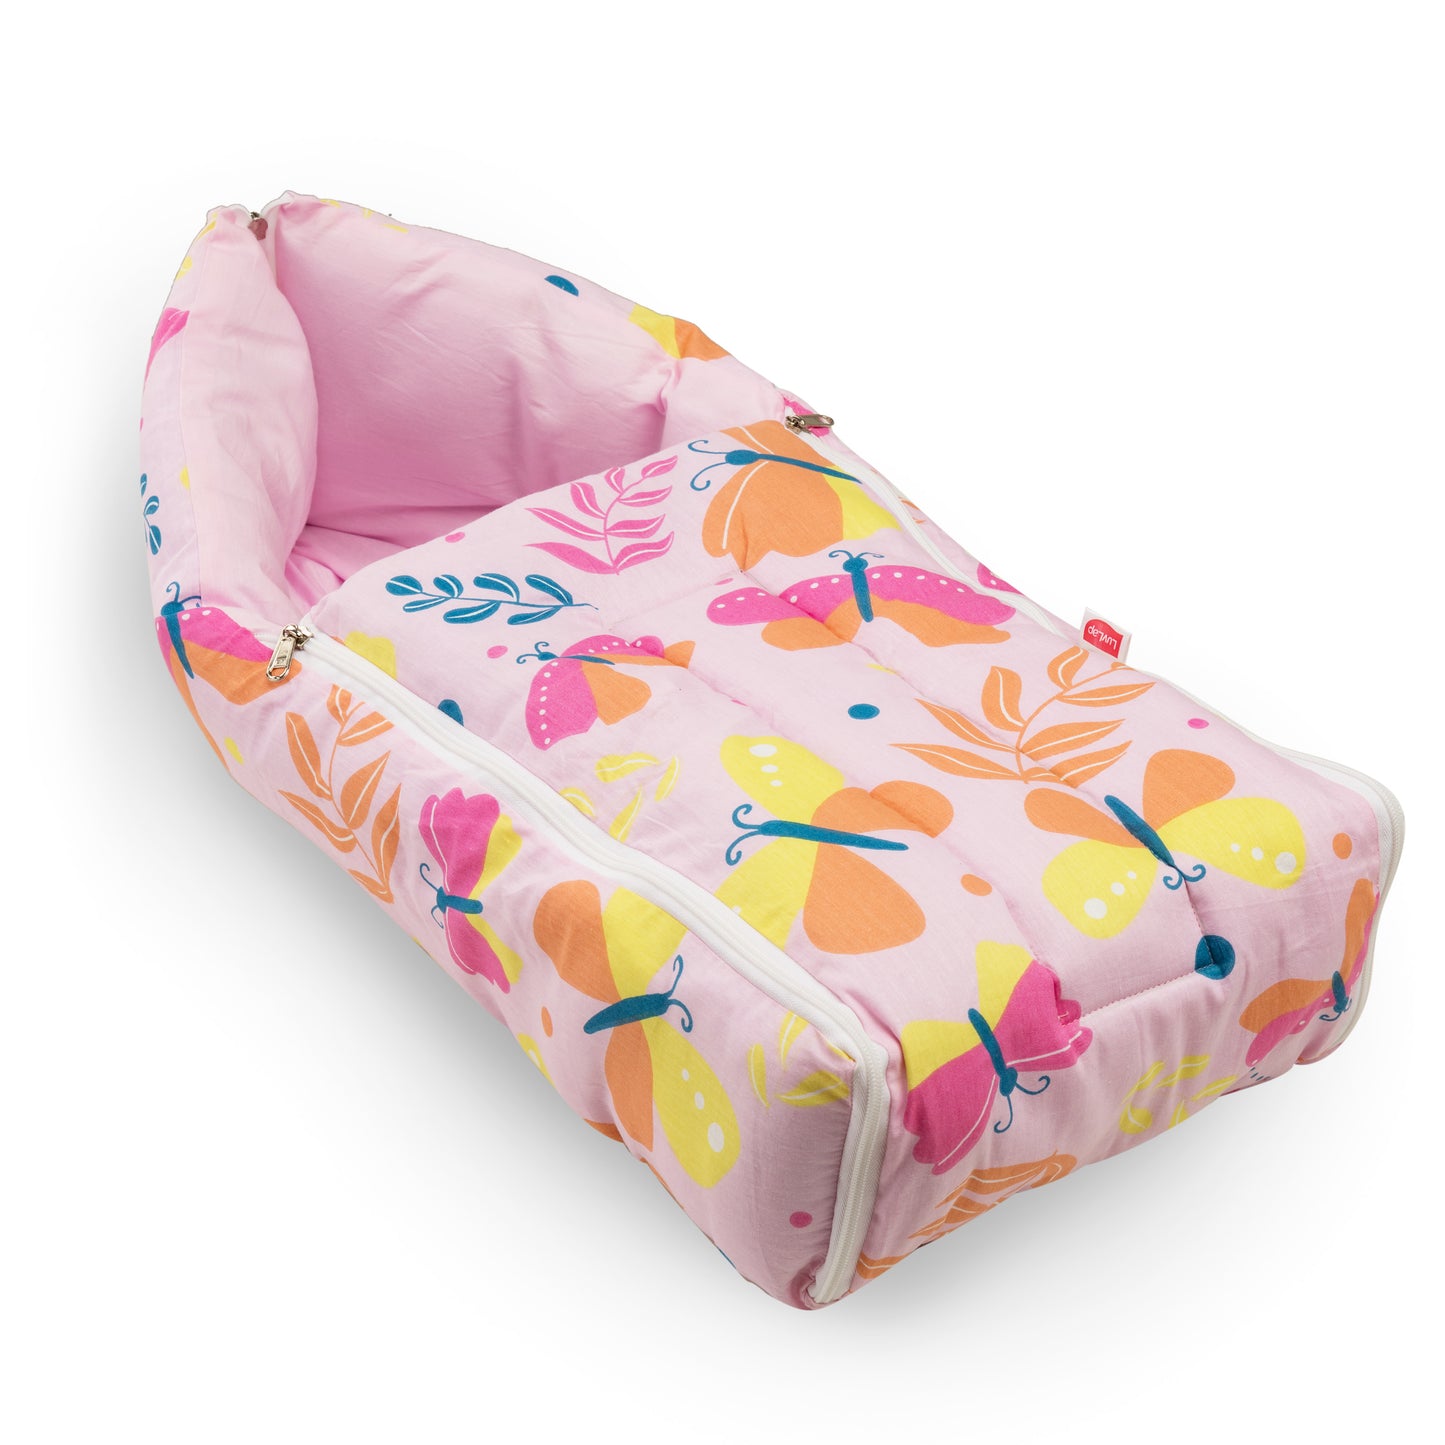 3 in 1 Baby Bed, Sleeping Bag & Carry Nest - Pink Pilot Print